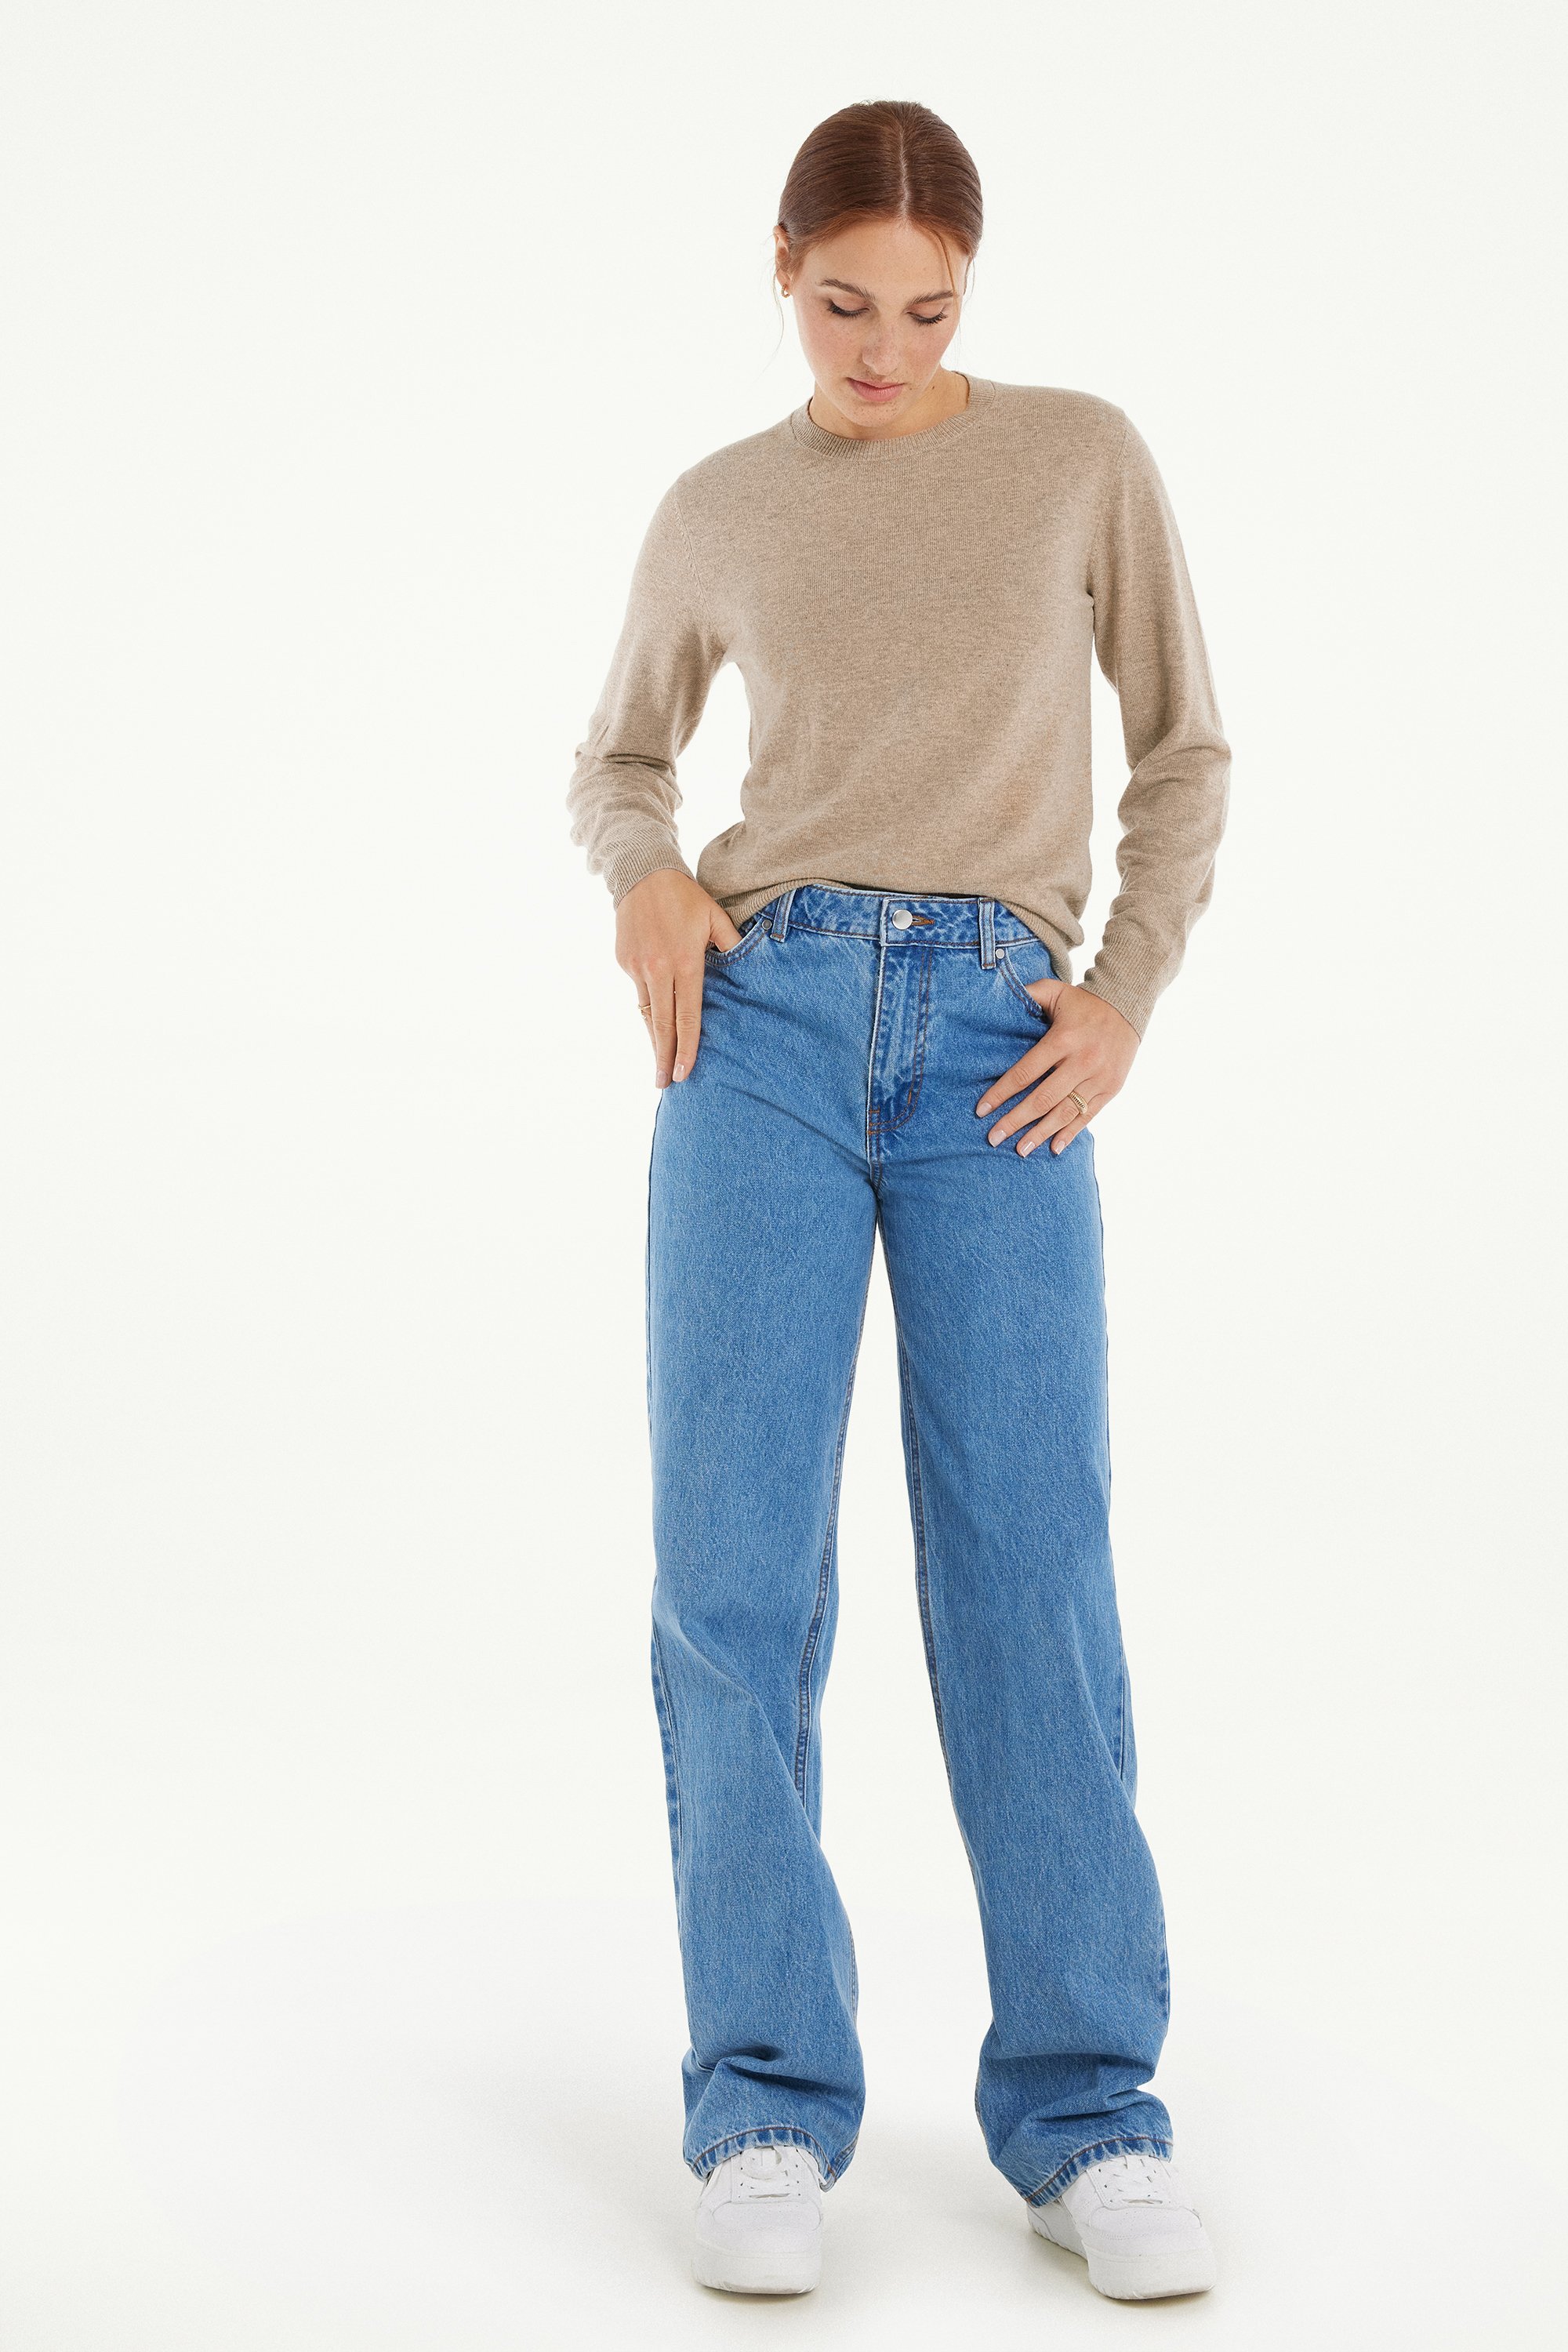 Long-Sleeved Rounded Neck Heavy Jersey with Wool